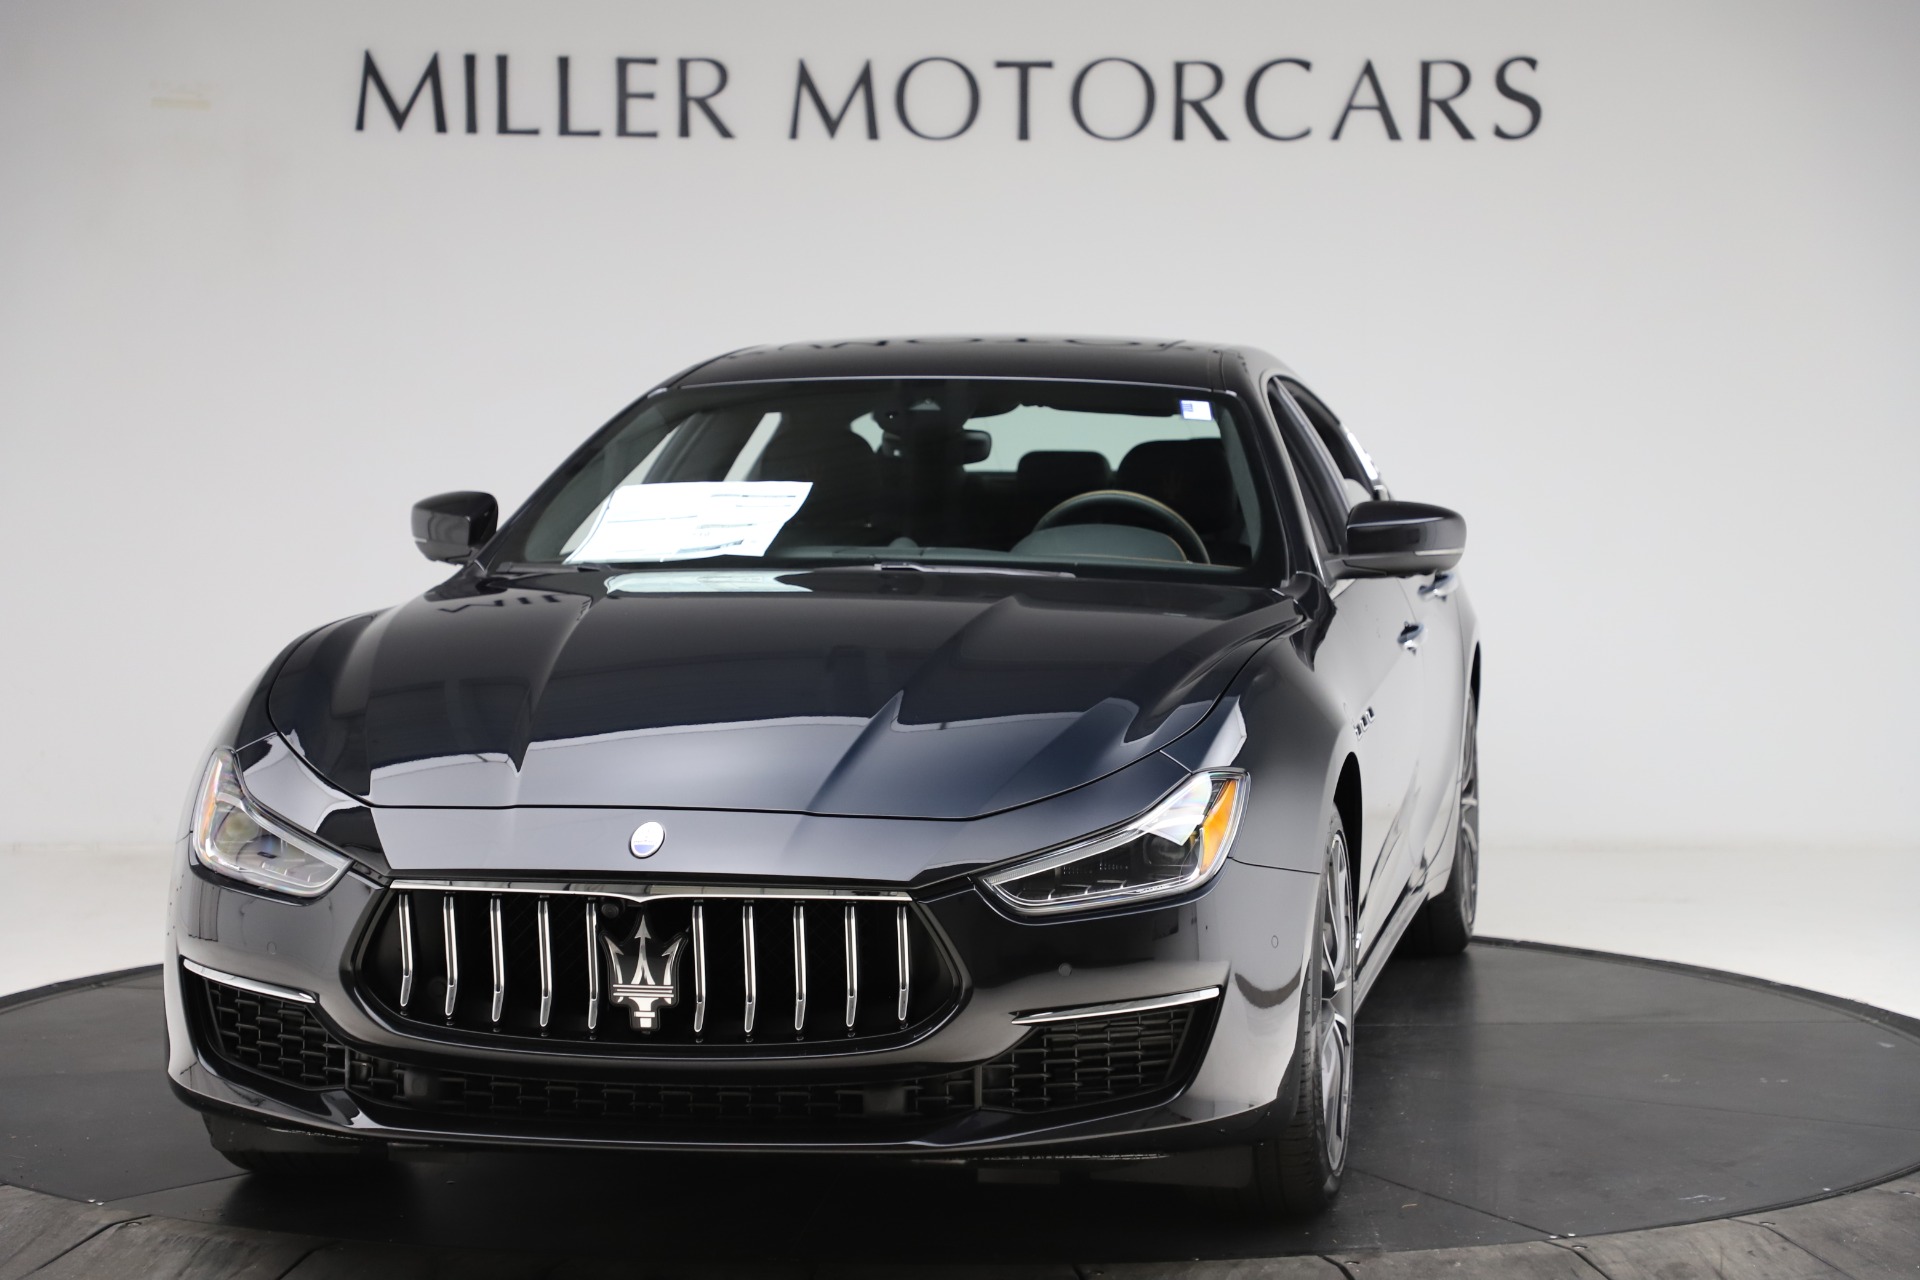 New 2021 Maserati Ghibli S Q4 GranLusso for sale Sold at Pagani of Greenwich in Greenwich CT 06830 1